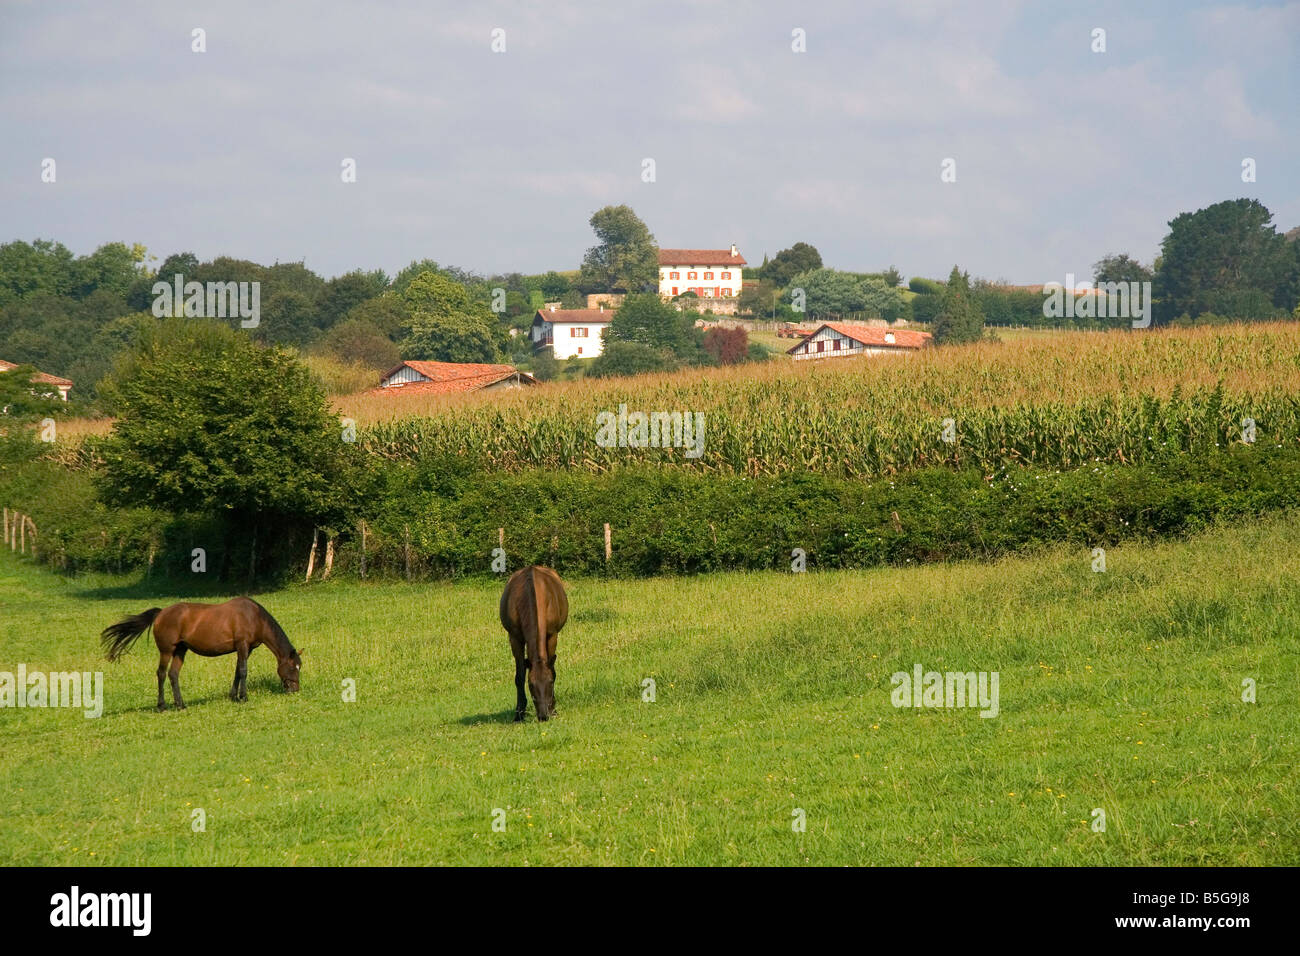 Horse graze on rural farmland in the Pyrenees Atlantiques department of French Basque Country Southwest France Stock Photo